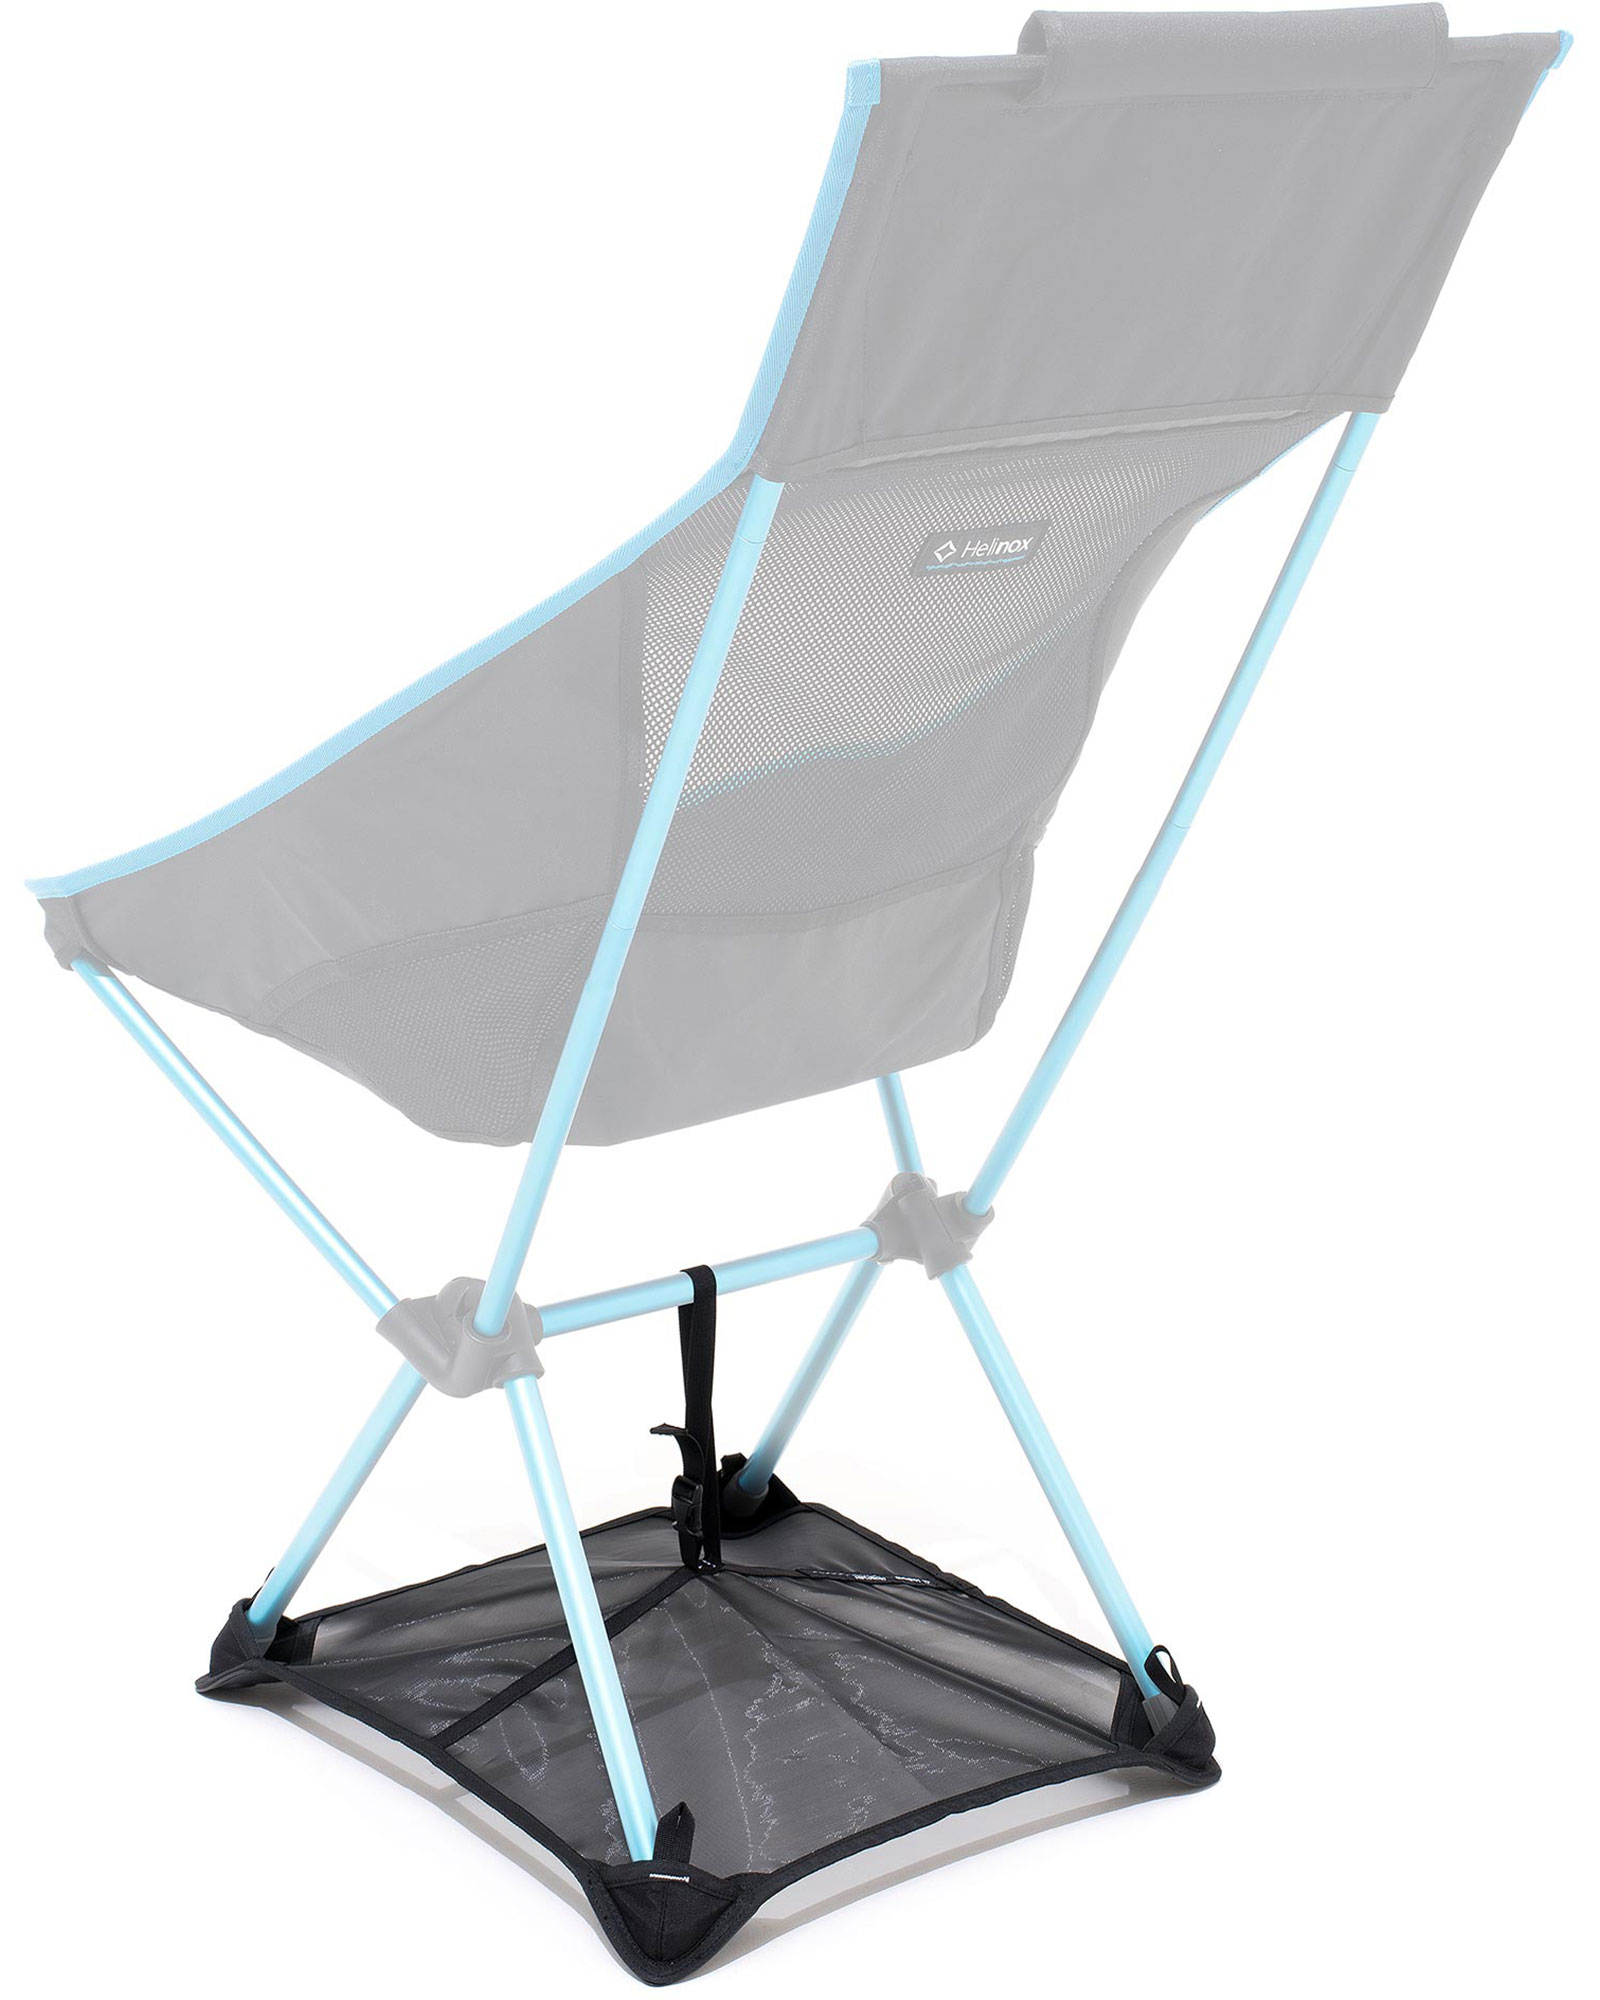 Helinox Ground Sheet for Sunset Chair - black